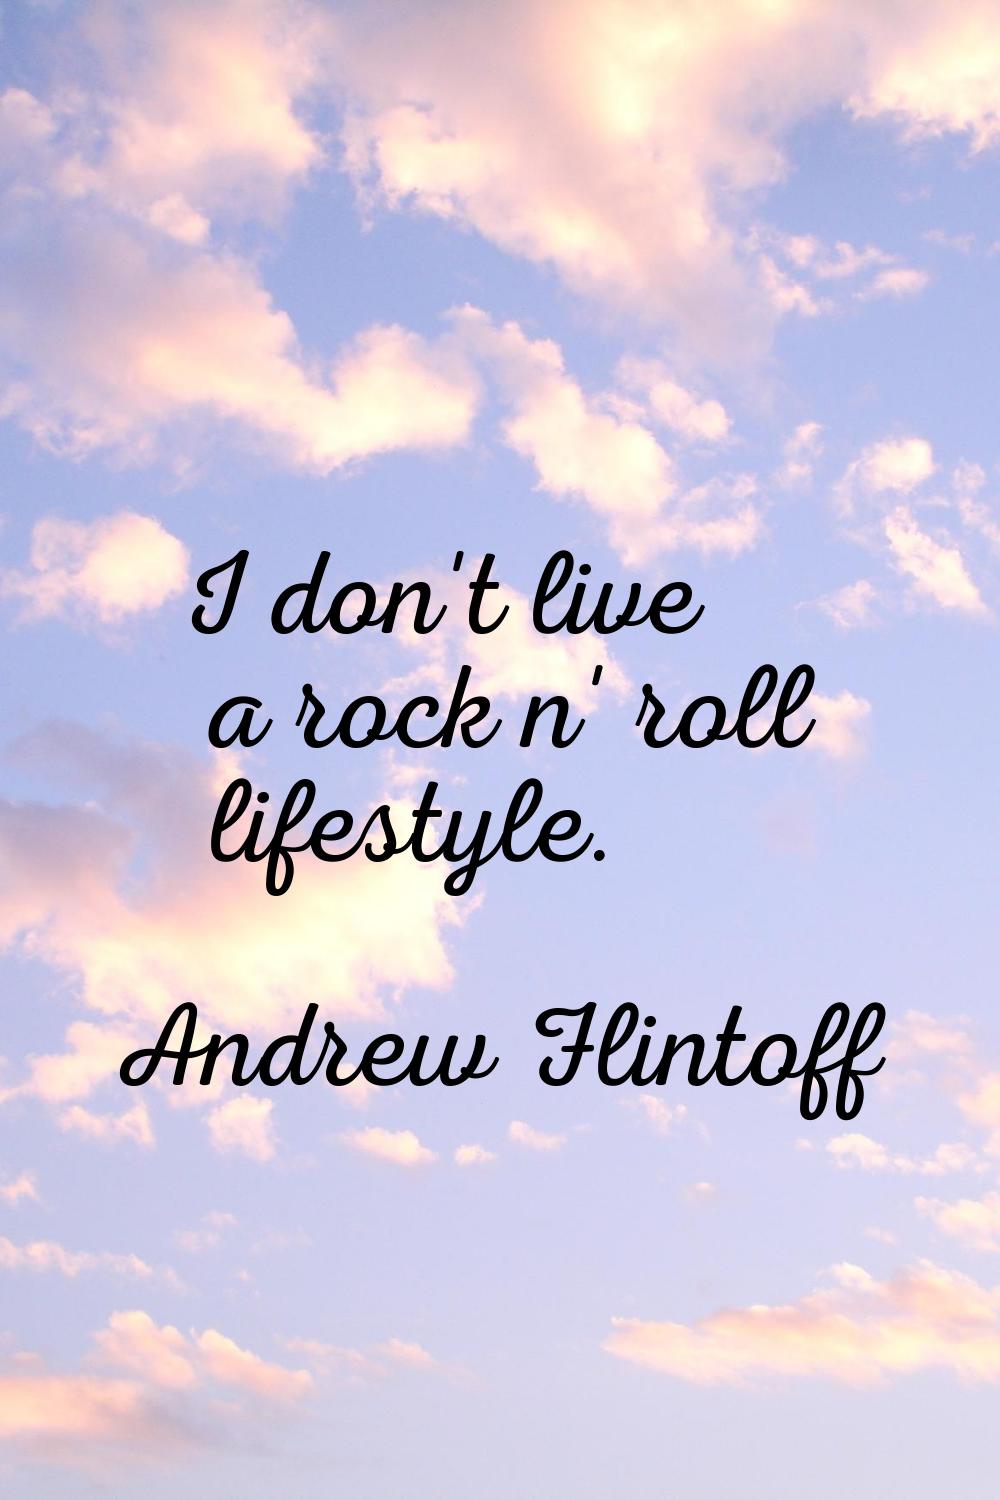 I don't live a rock n' roll lifestyle.